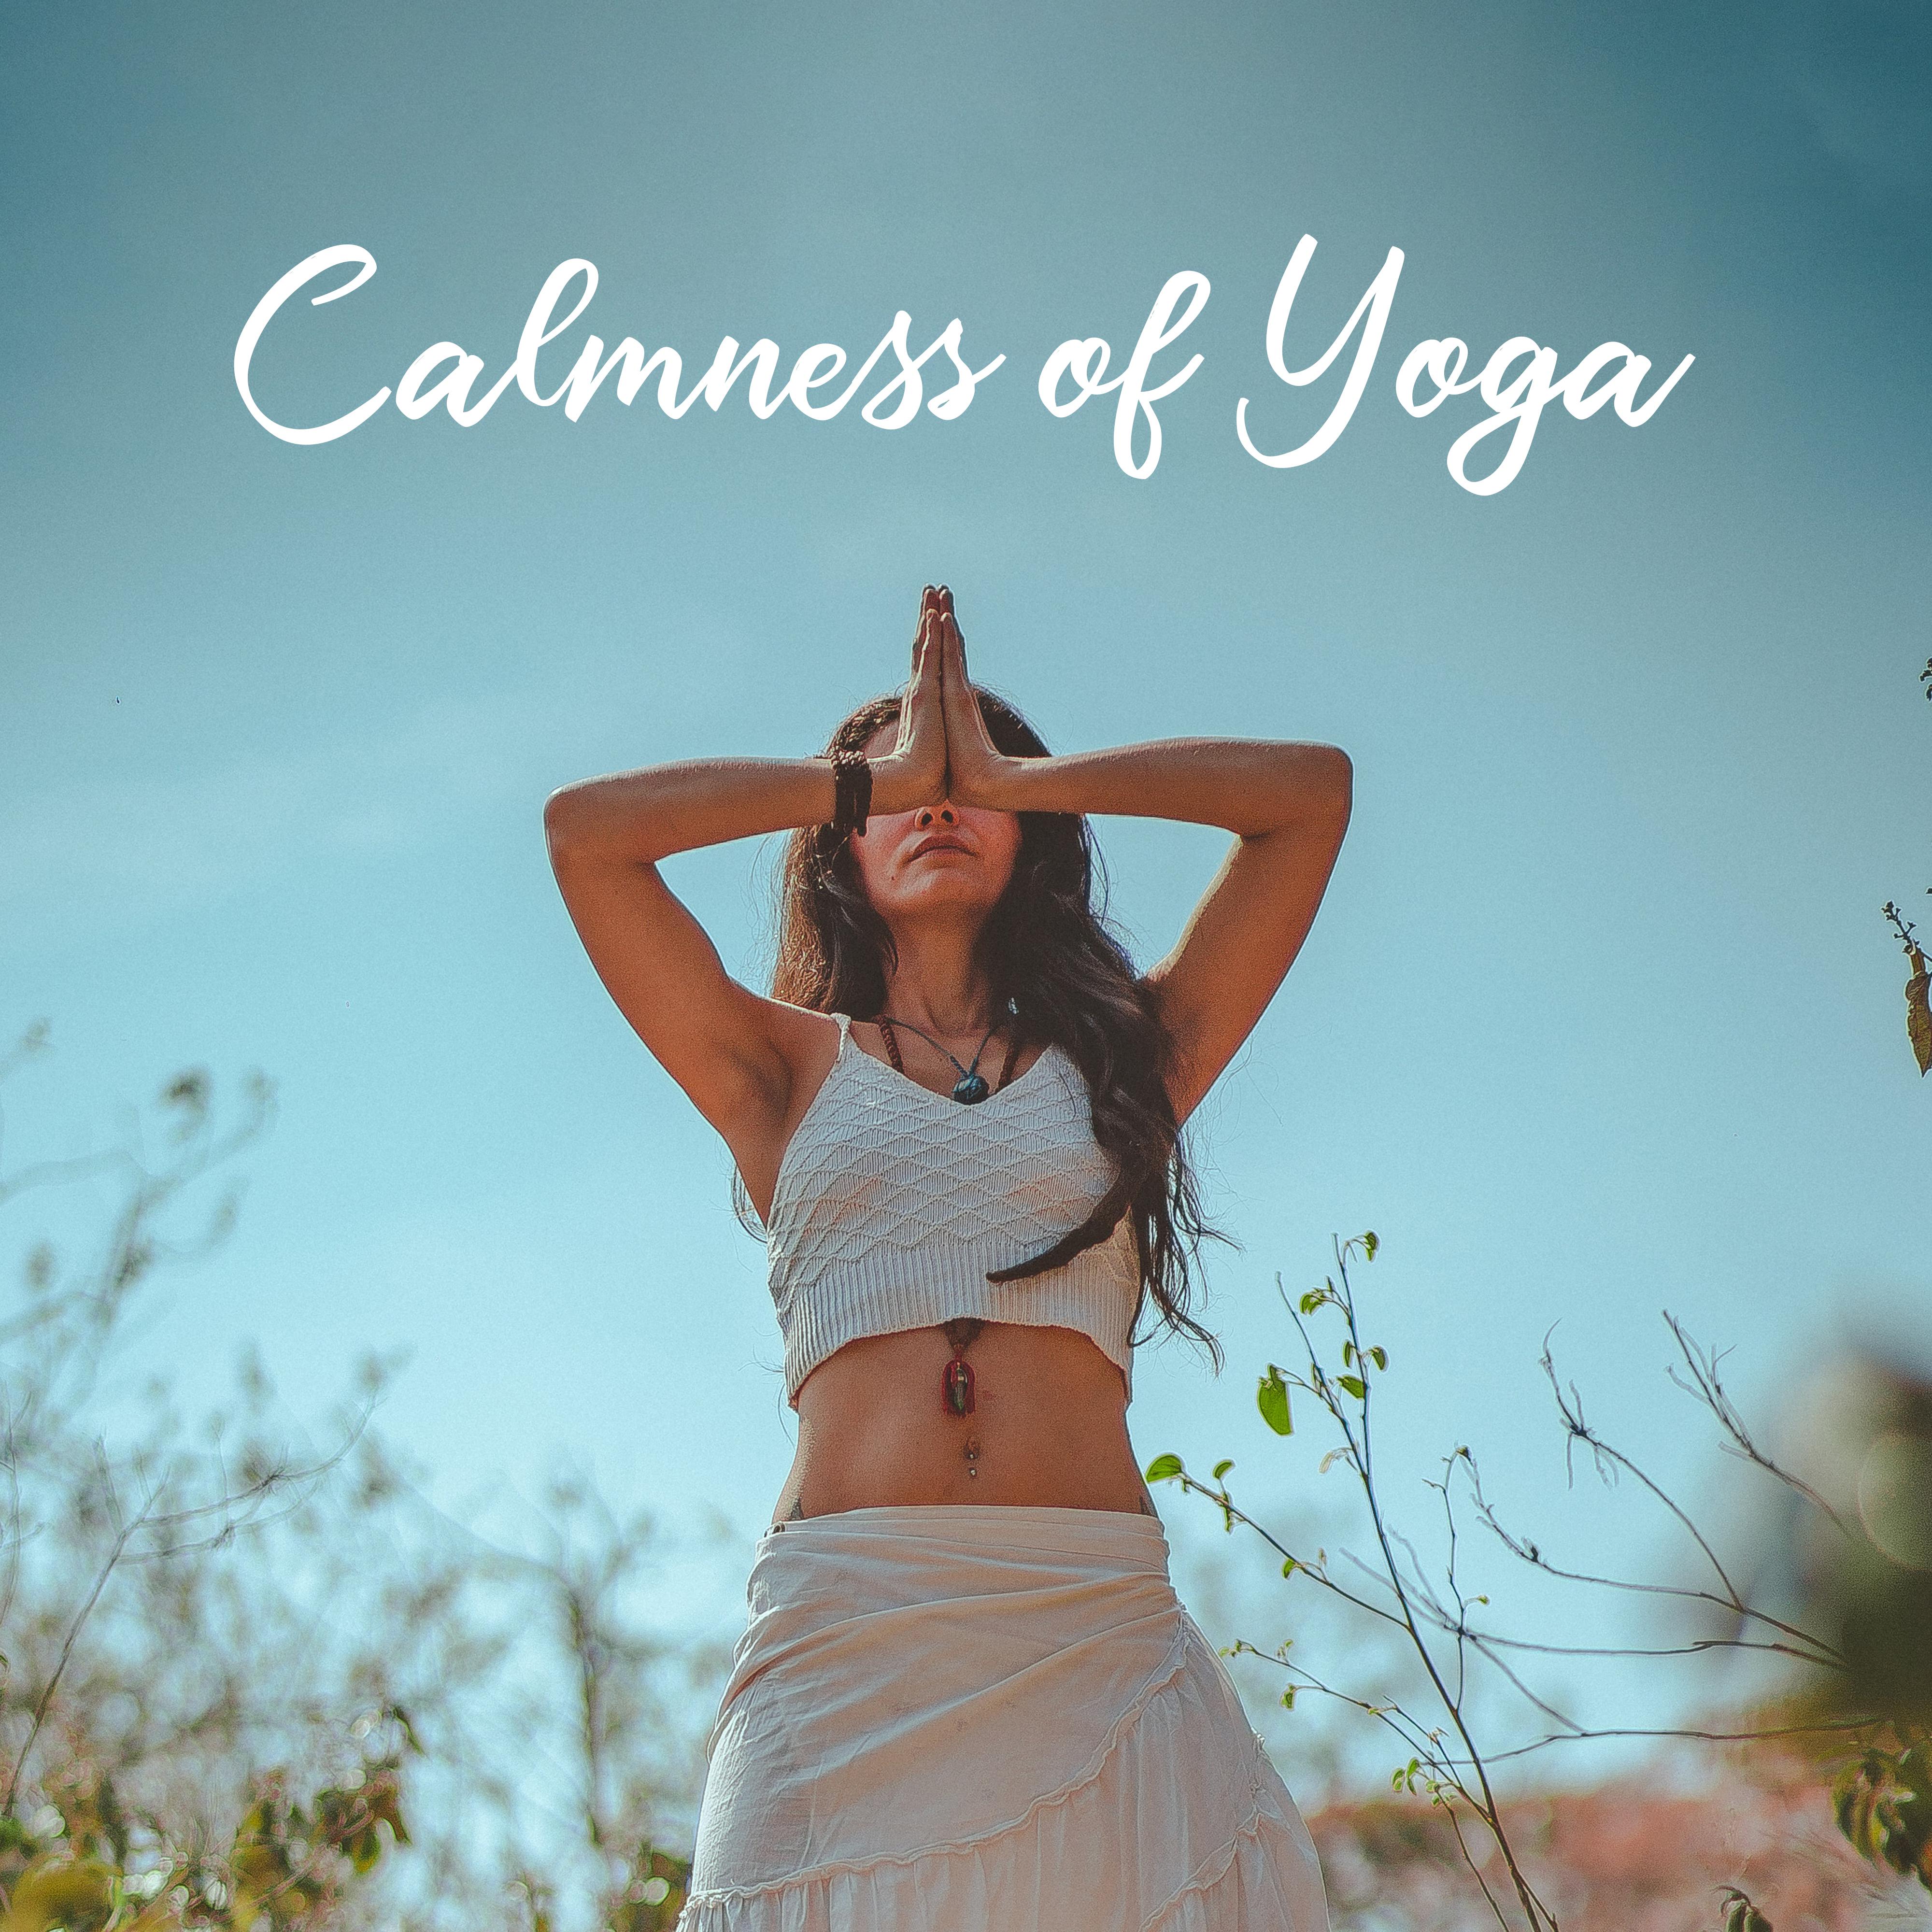 Calmness of Yoga: New Age 2019 Music for Meditation & Relaxation, Calm Down Bad Emotions, Find Your Inner Harmony, Increase Life Energy, Balance Body & Mind